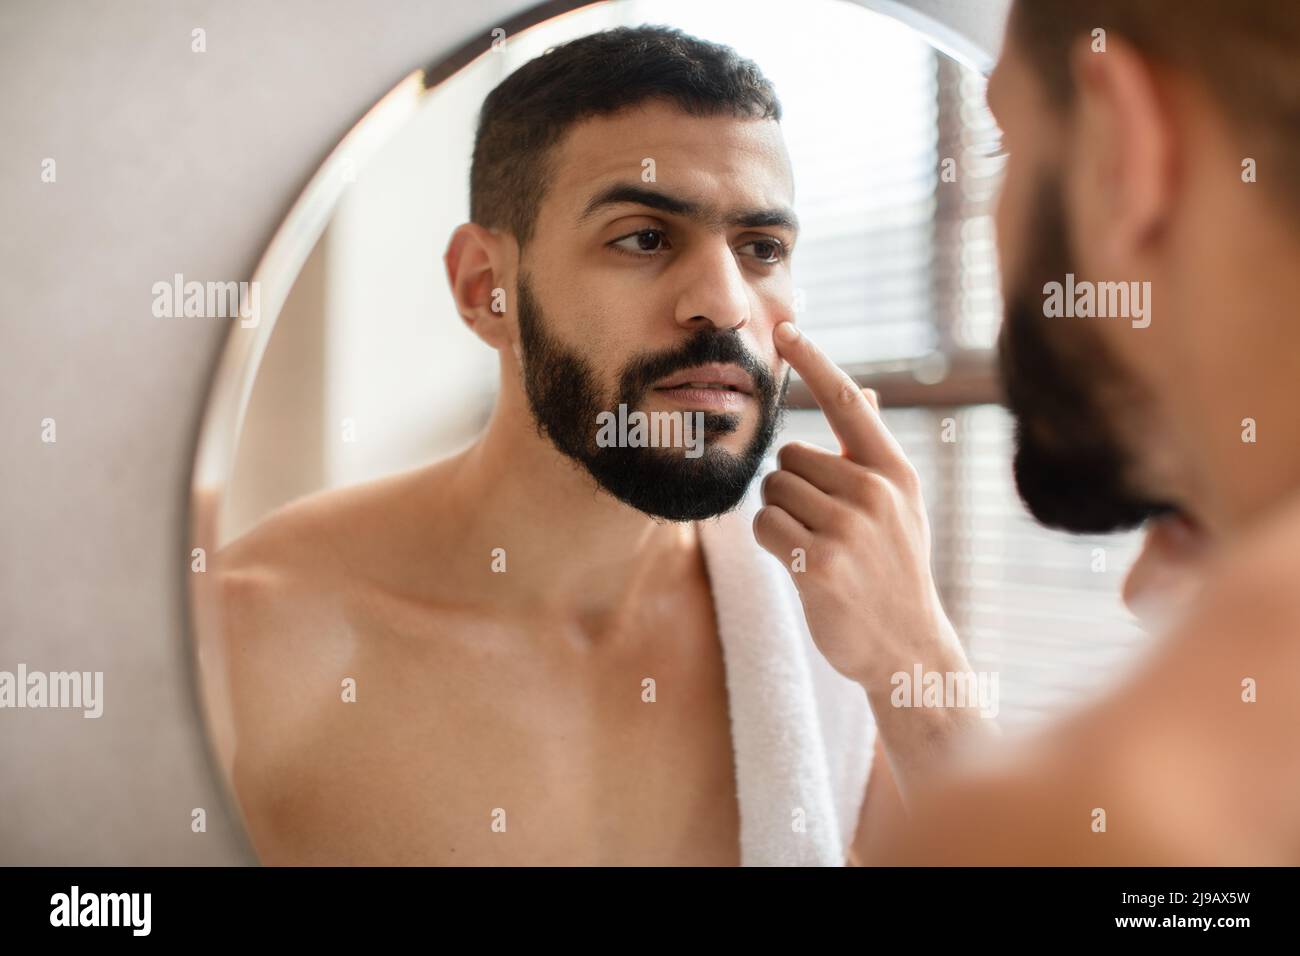 Guy looking in the mirror applying cream on face Stock Photo